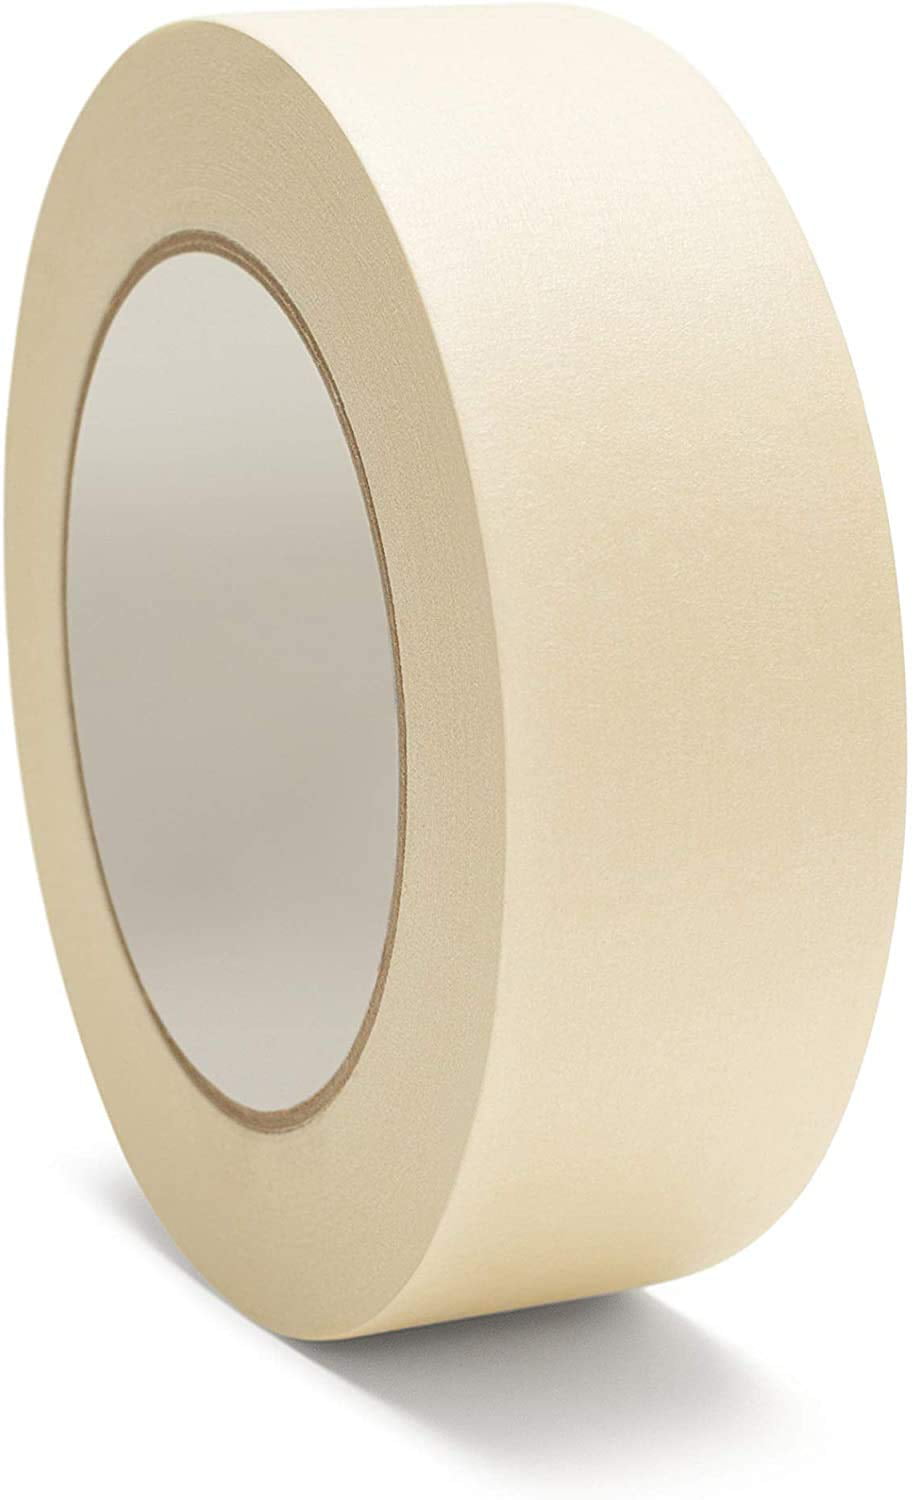 YouKing White Masking Tape 2 inch Wide, Easy Tear Painter’s Tape. 2rolls Painting Tape Best for Home and Office (2Rolls 2 x55yds)